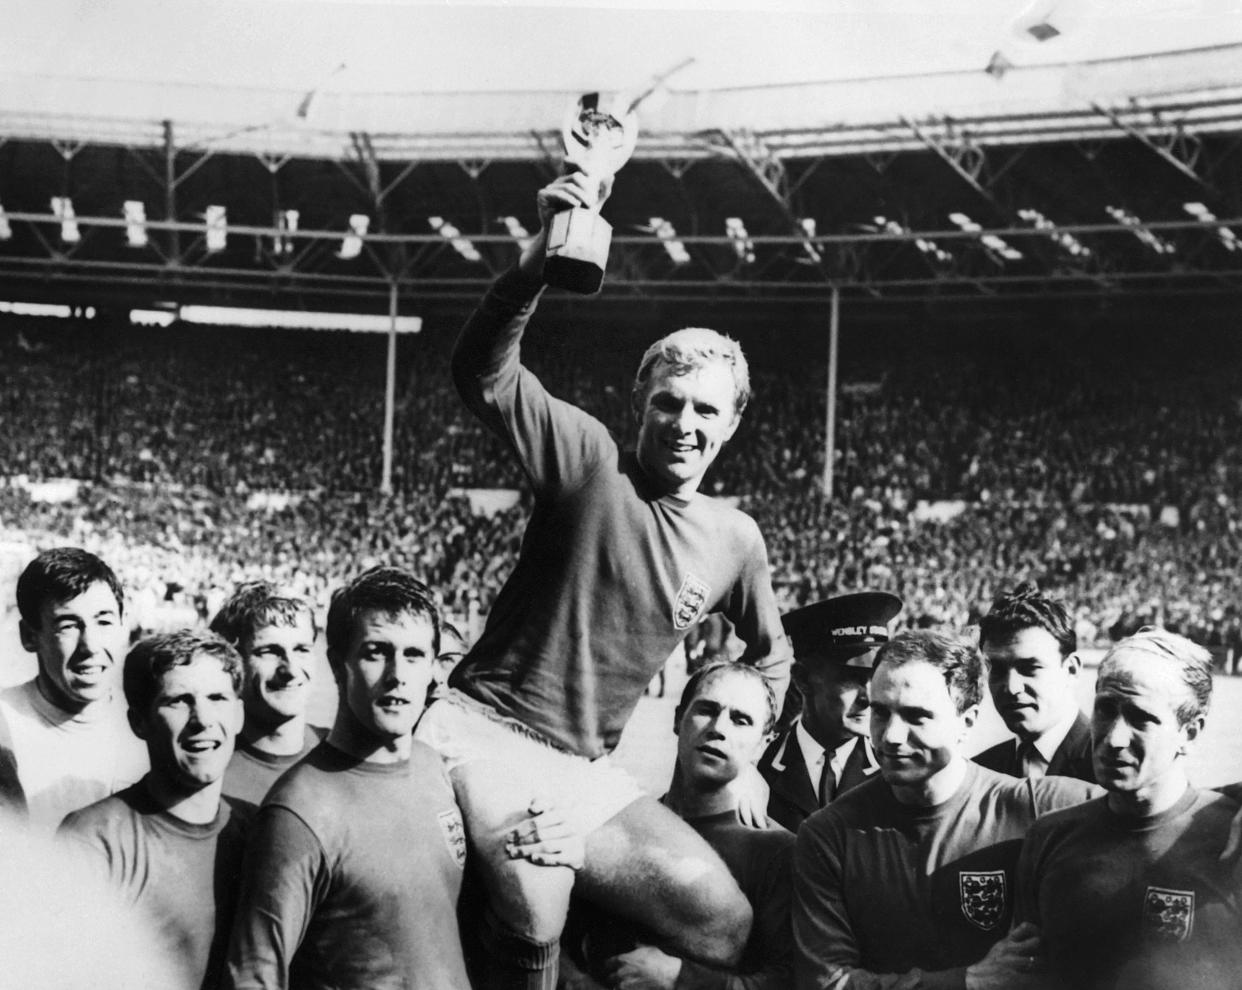 England's national soccer team captain Bobby Moore holds aloft the Jules Rimet trophy as he is carried by his teammates following England's victory over Germany (4-2 in extra time) in the World Cup final 30 July 1966 at Wembley stadium in London.(From L : Gordon Banks, Alan Ball, Roger Hunt, Geoff Hurst - who scored three goals - , Ray Wilson, George Cohen and Bobby Charlton) (Photo by - / CENTRAL PRESS / AFP) (Photo by -/CENTRAL PRESS/AFP via Getty Images)